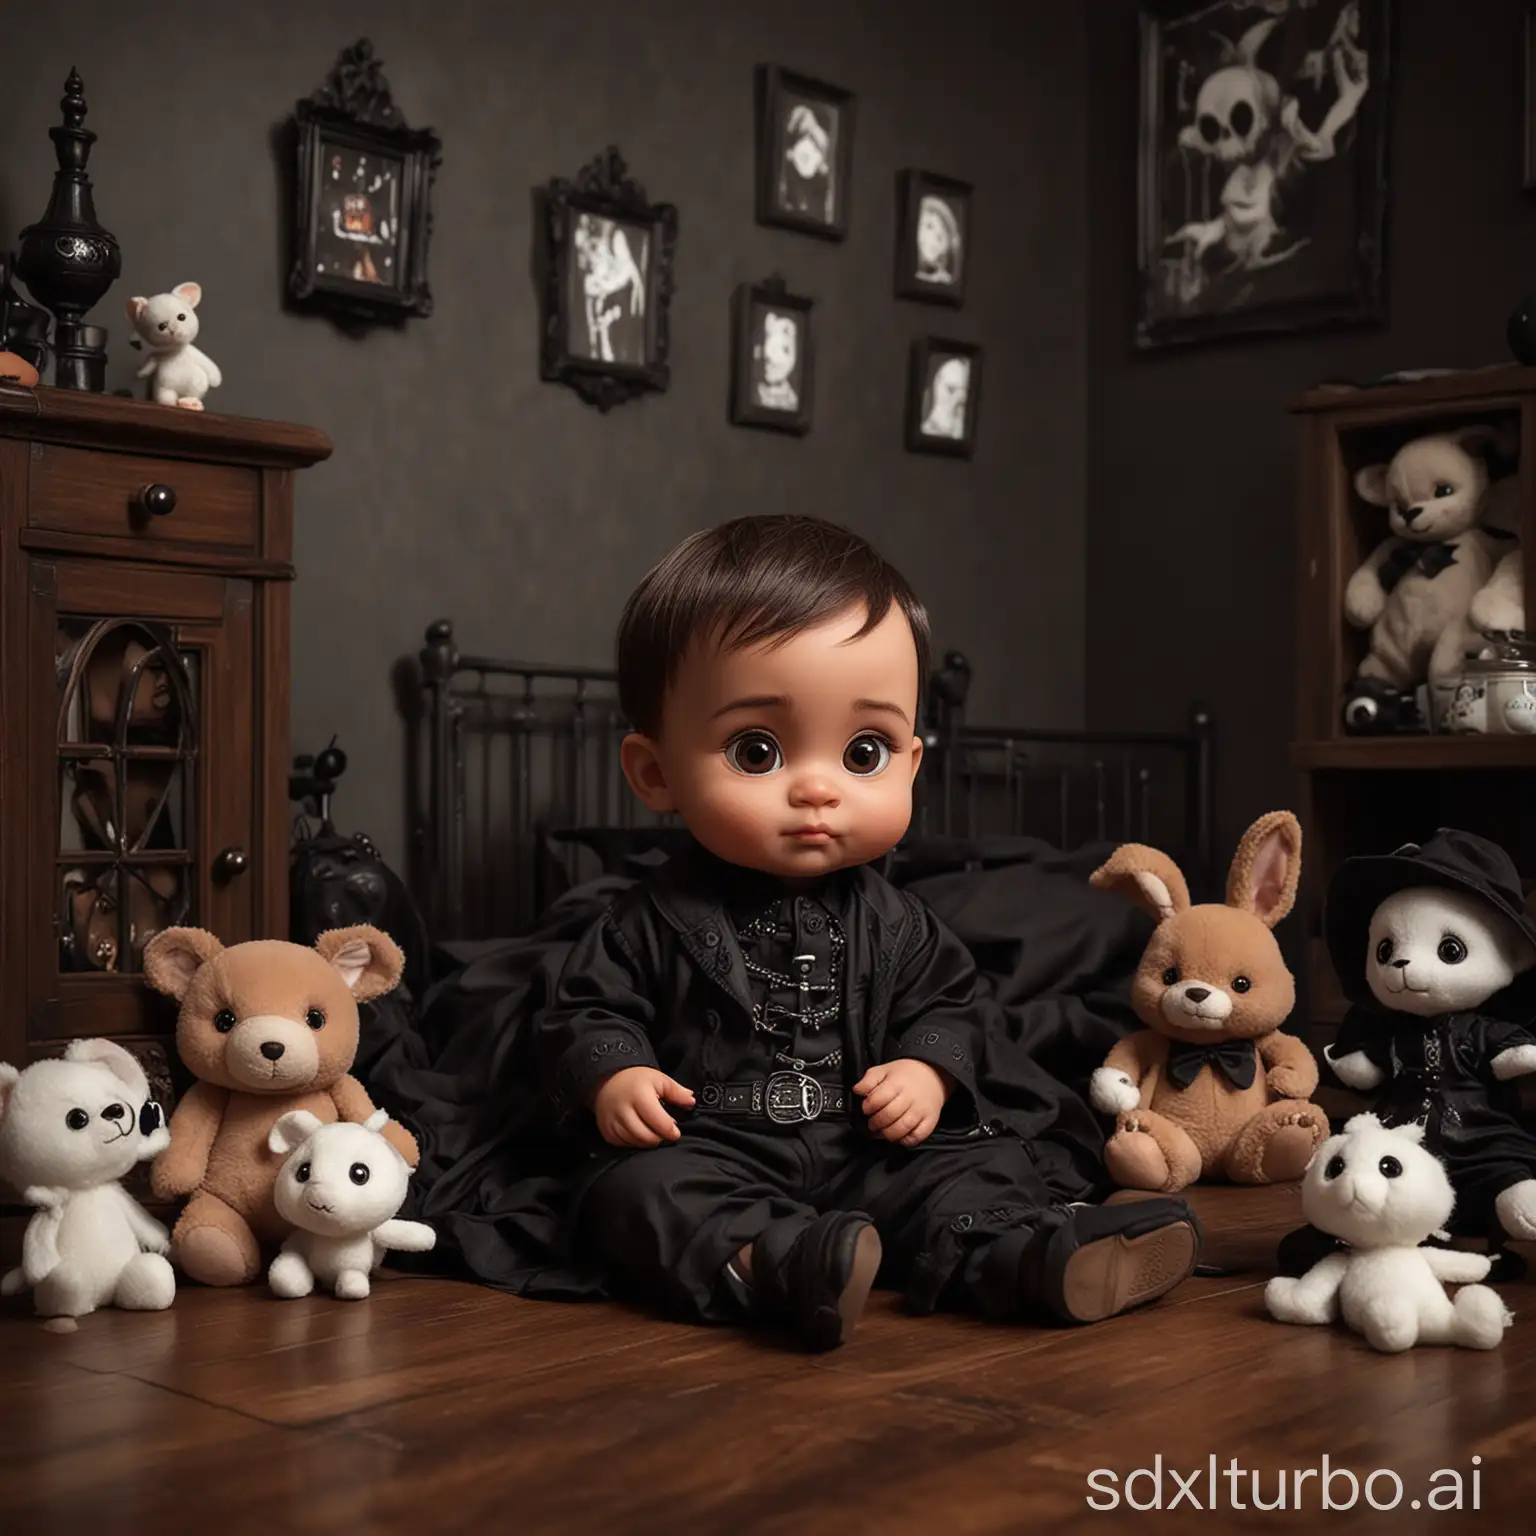 Super Cute, adorable, lighter skinned black, brown, little baby boy, toddler, big brown eyes, gothic clothes, playing, siting on the floor in gothic baby room, dark decor,  spooky, pixar, the addams family, Halloween, chibi, ultra realistic, shoes on feet, one small stuffed bunny in one hand.